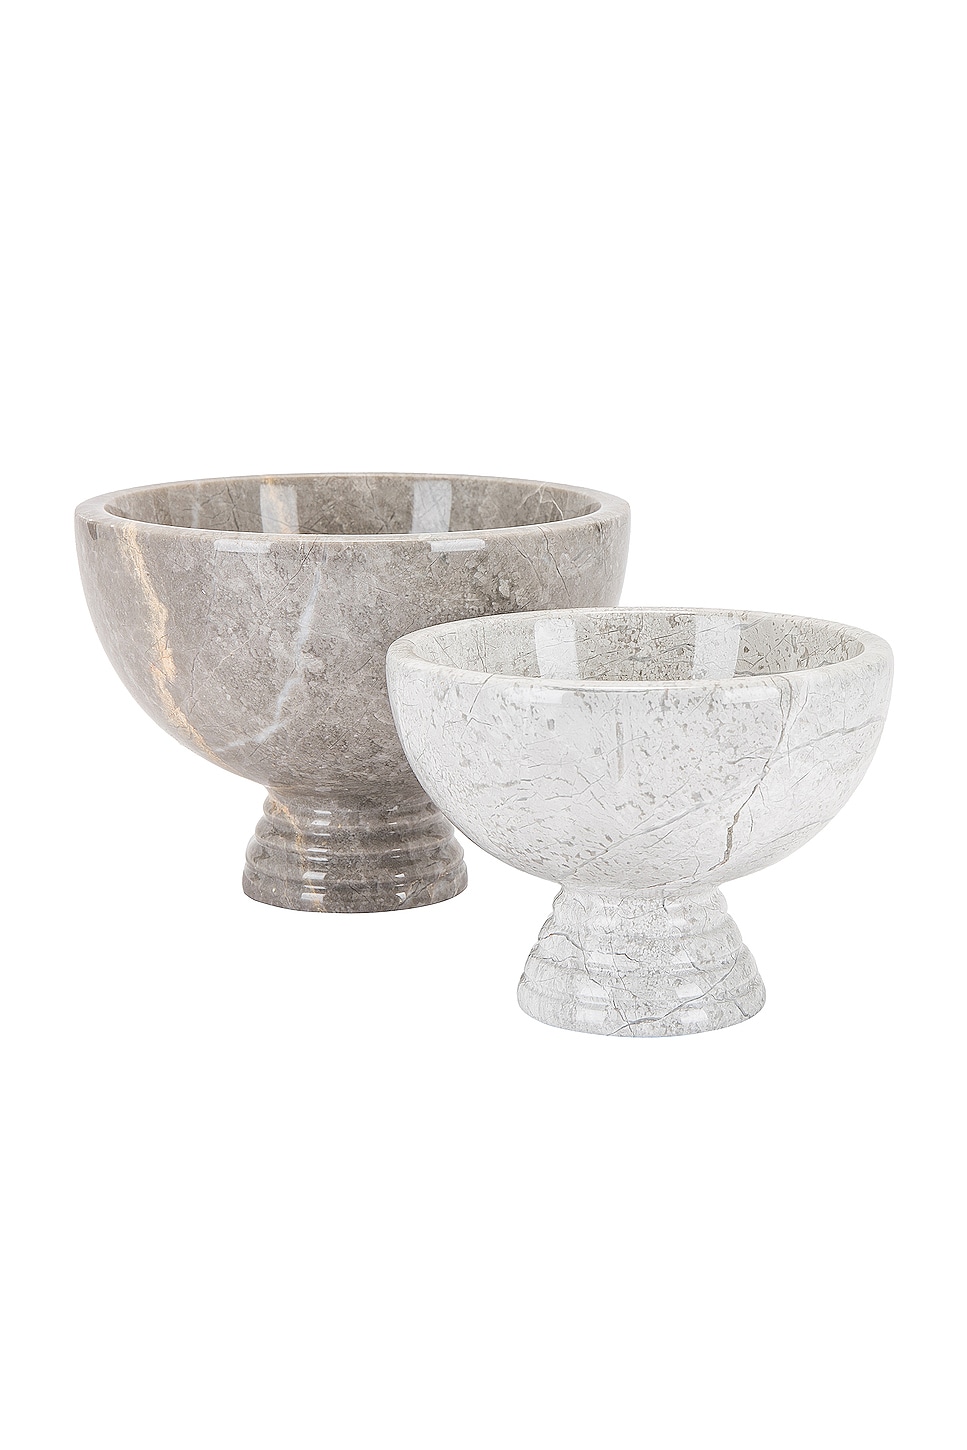 Image 1 of Anastasio Home Welcome Pots Set Of 2 in Oyster